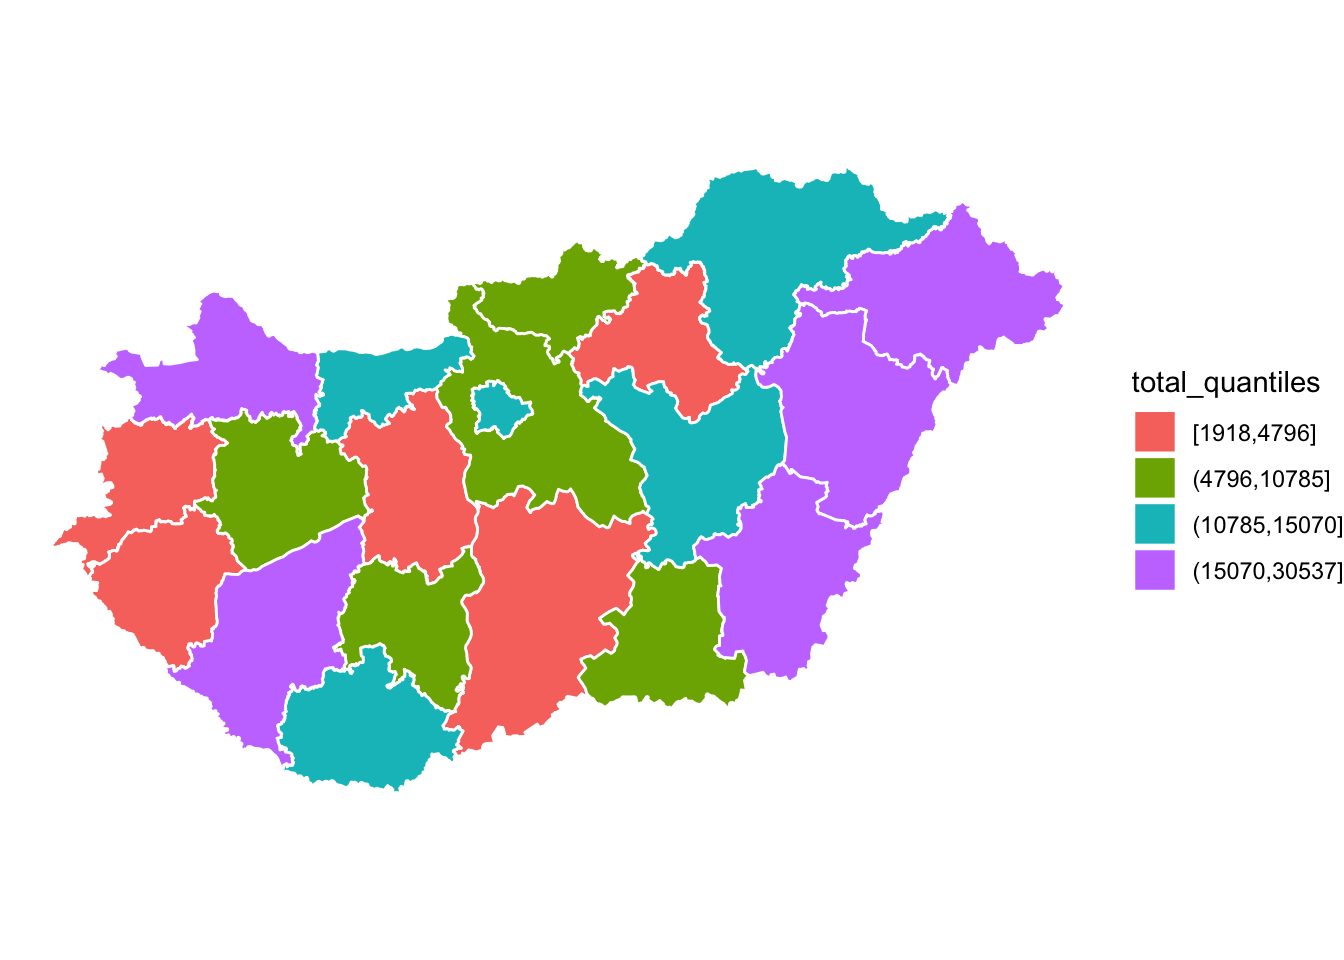 The map still has the white borders between counties, but now those counties have been coloured in four bright colours, red, green, blue, and purple. The legend has changed from a gradient to four colour boxes with labels for their ranges in the form x comma y, and is now labeled 'total quantiles'.